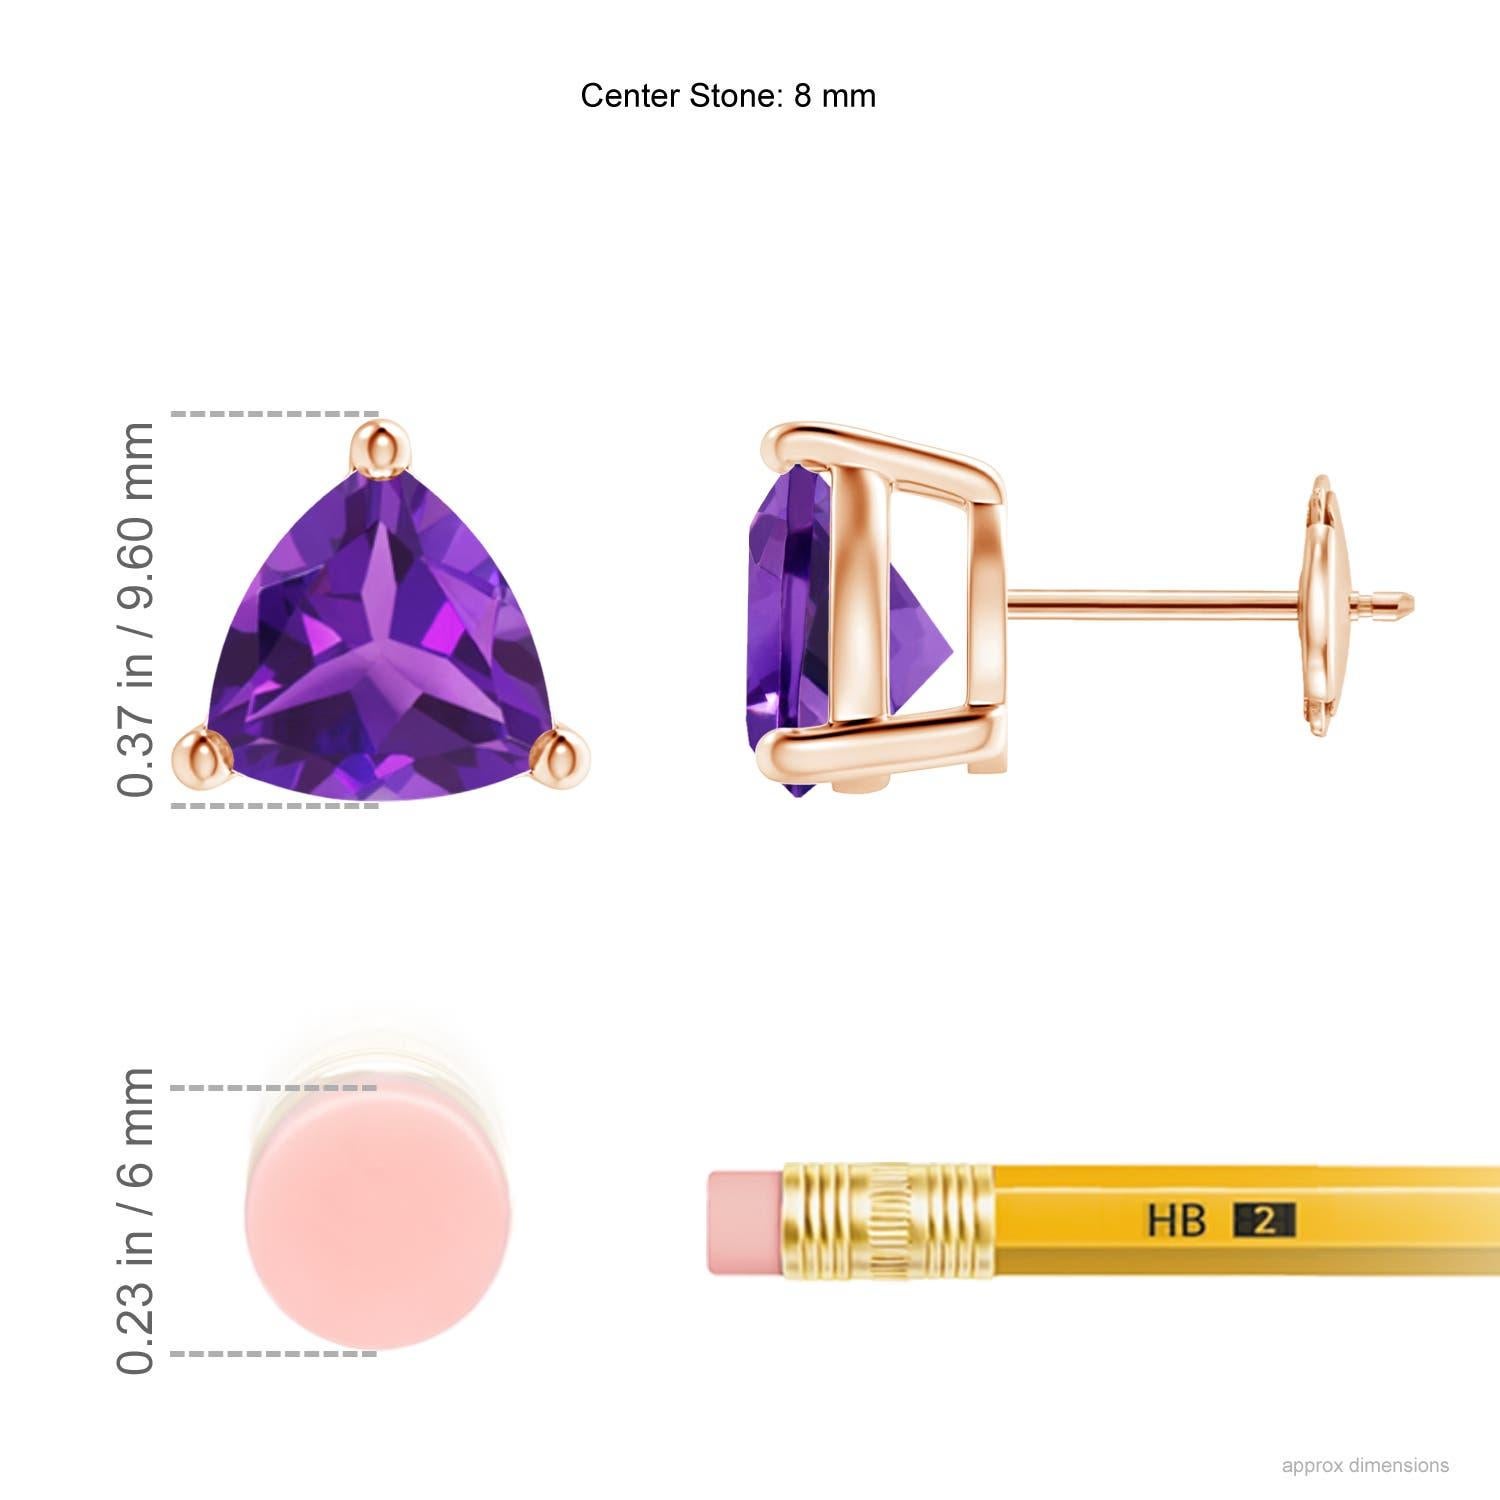 Displaying the royal purple amethysts in a prong setting, these solitaire stud earrings are a pair of enviable beauty. The gemstones are cut in a striking trillion shape and mounted in 14k rose gold.